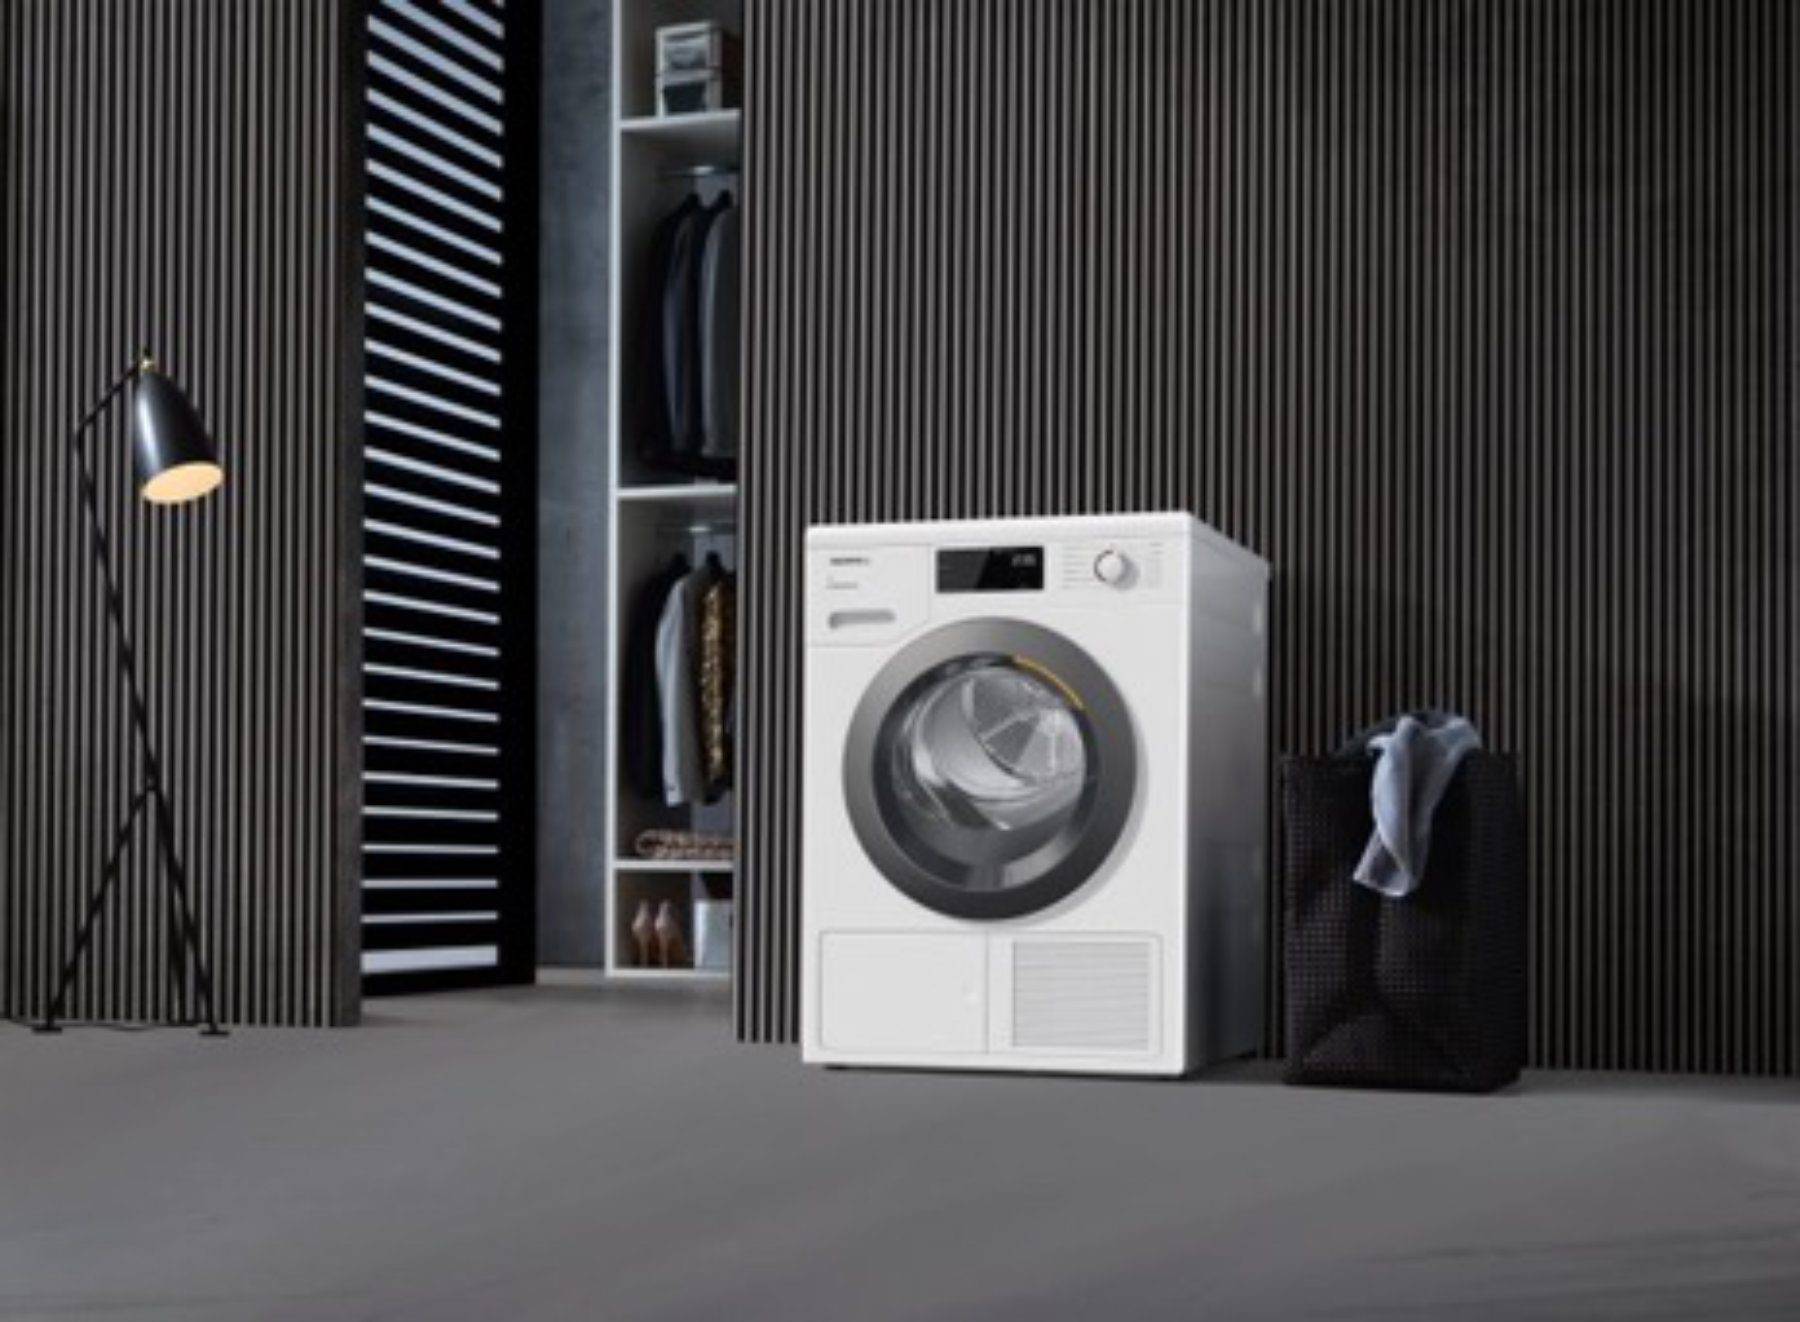 Miele Washer Dryers And Appliances In Stafford Www.staffordshirekitchens.com | Cole Roberts, Loughborough